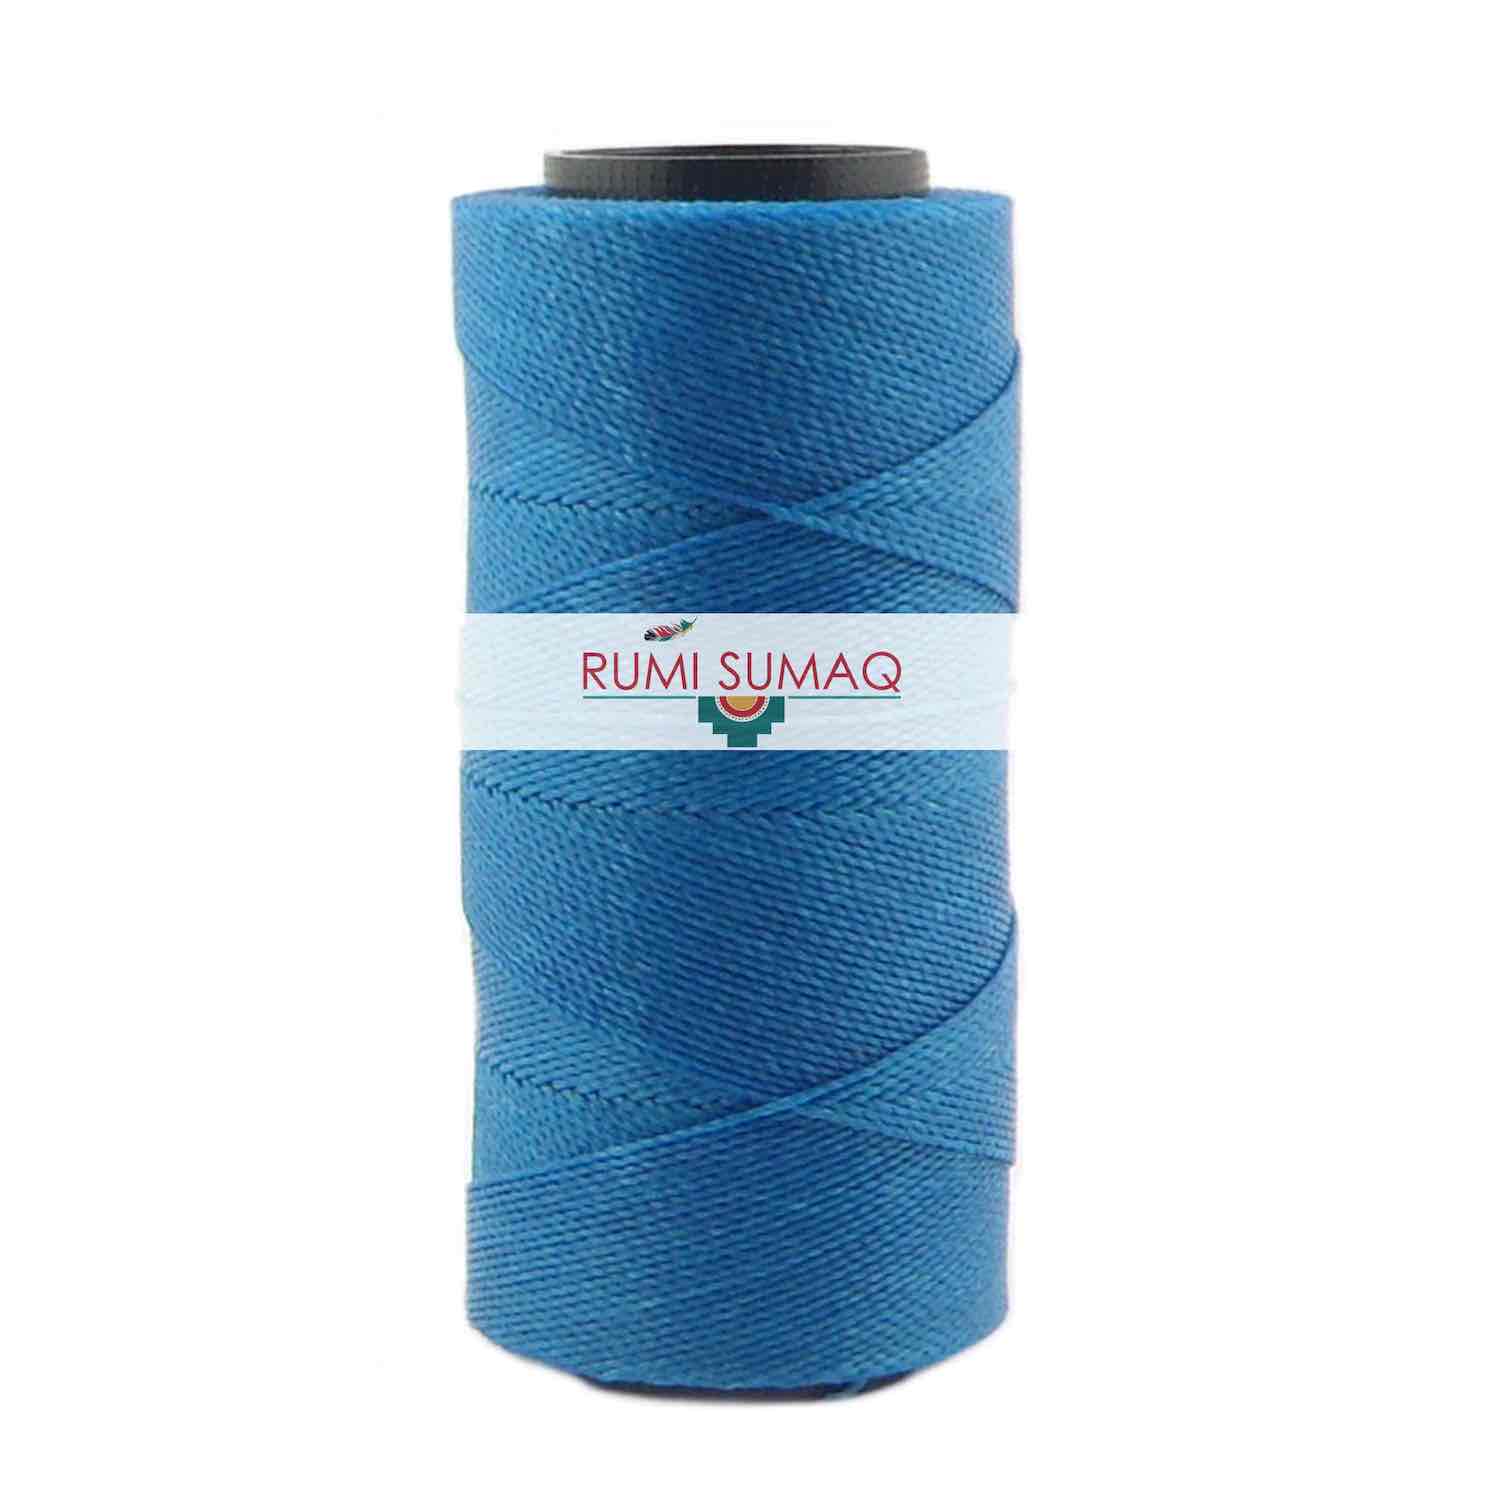 Settanyl 04-707 Ahoy 1mm waxed polyester cord available at RUMI SUMAQ. Brazilian waxed cord for macrame jewelry, friendship bracelets, beading, and leather working.